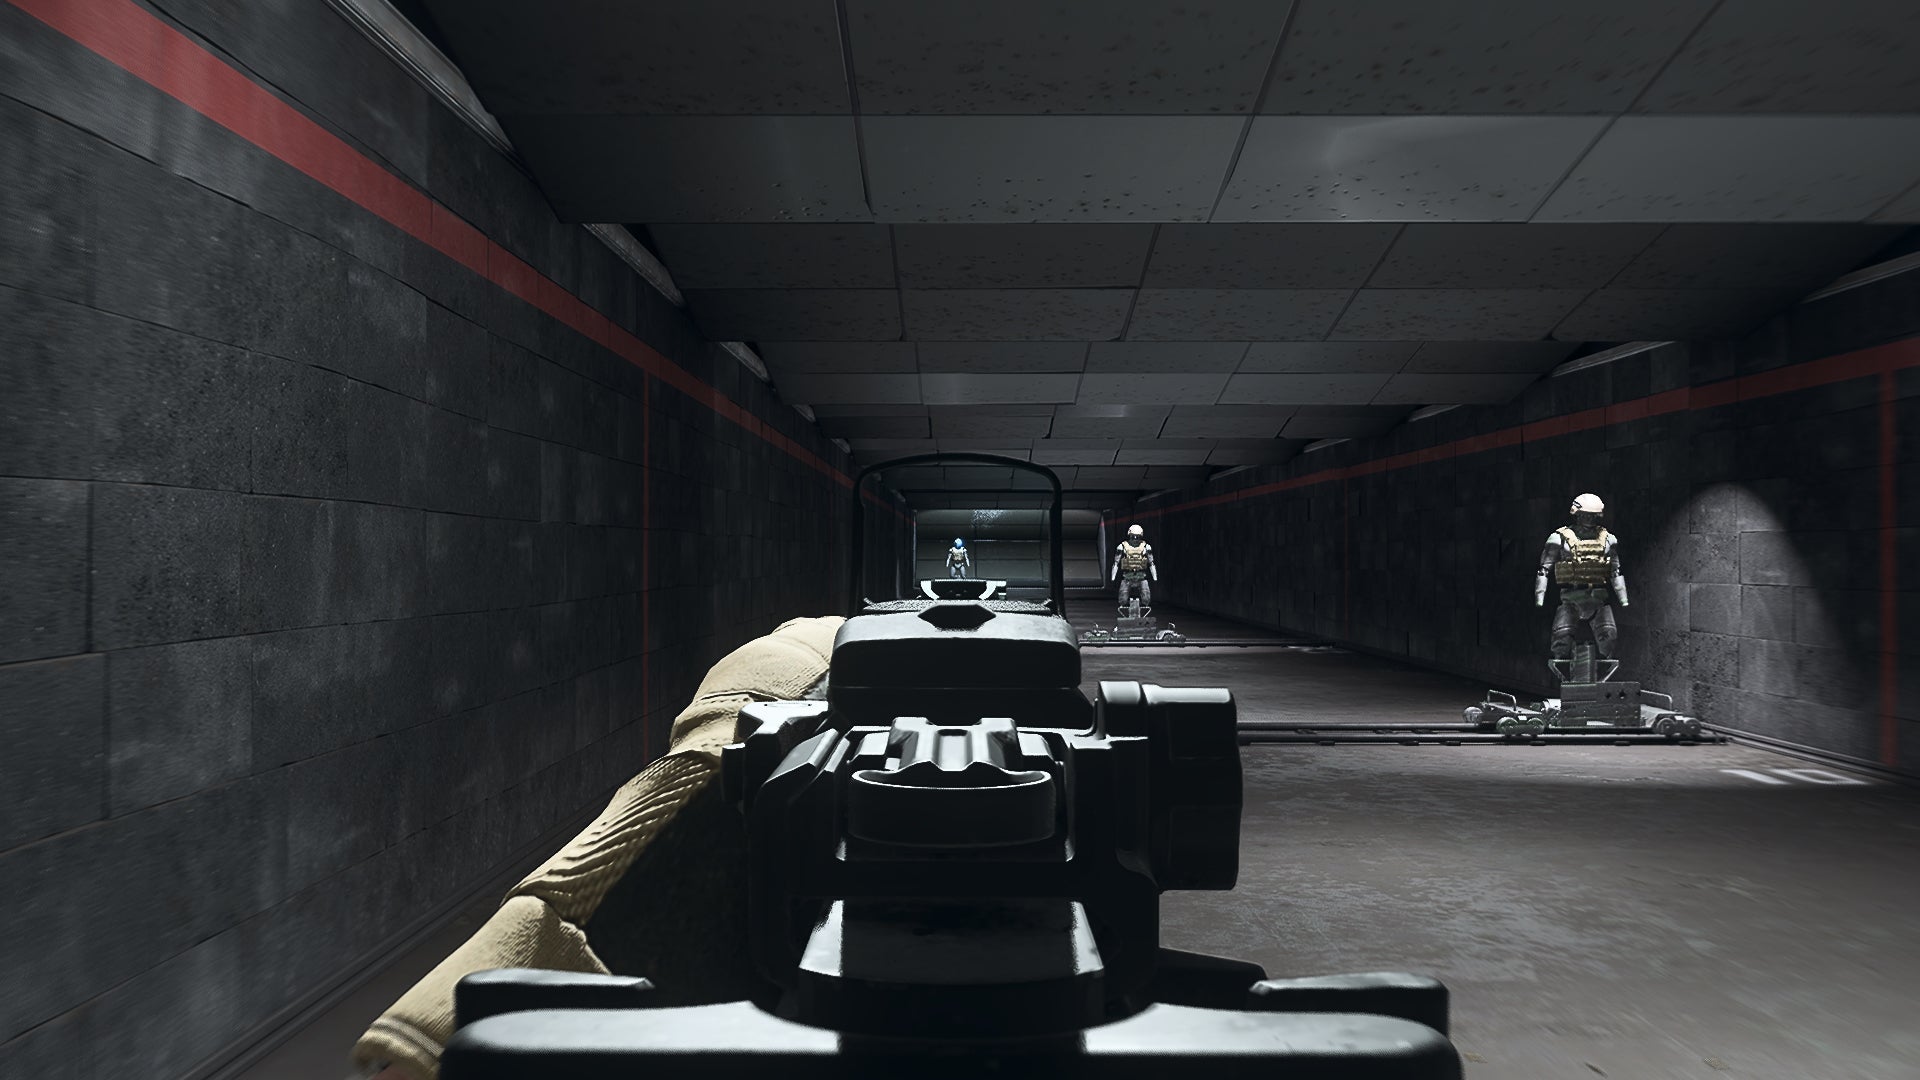 The player in Warzone 2.0 aims at a training dummy using the Cronen Mini Pro optic attachment.